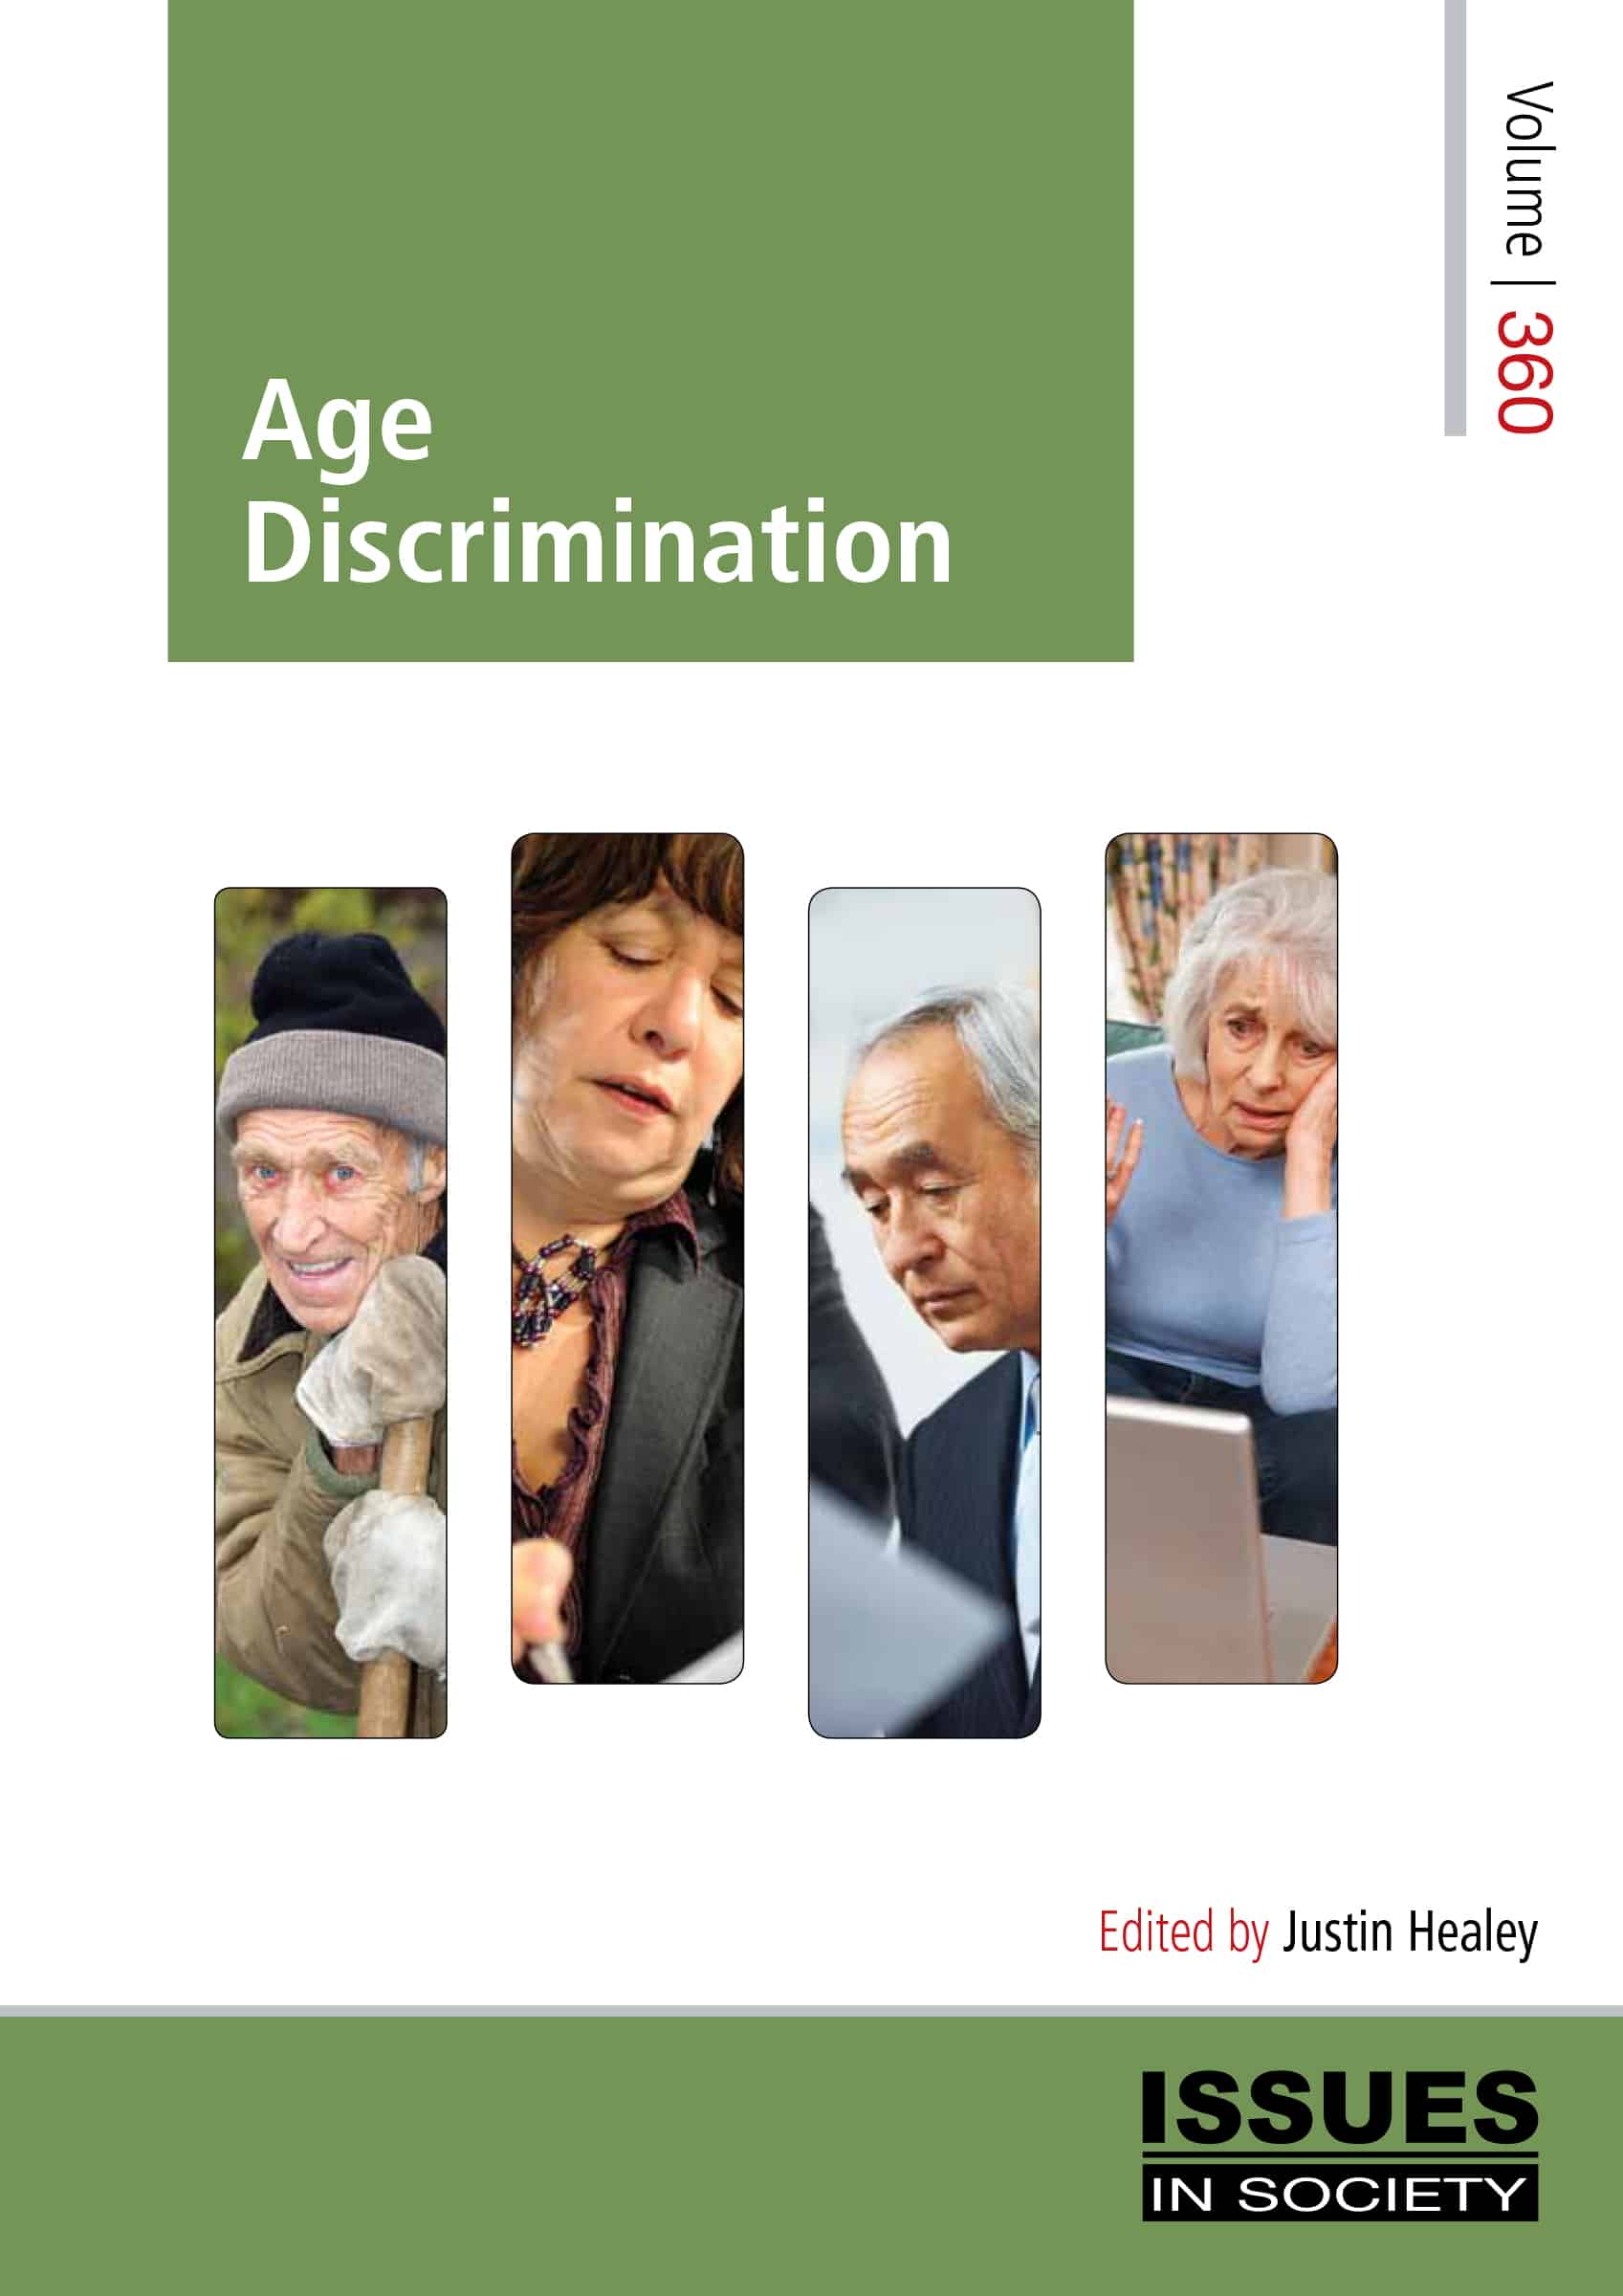 research paper about age discrimination